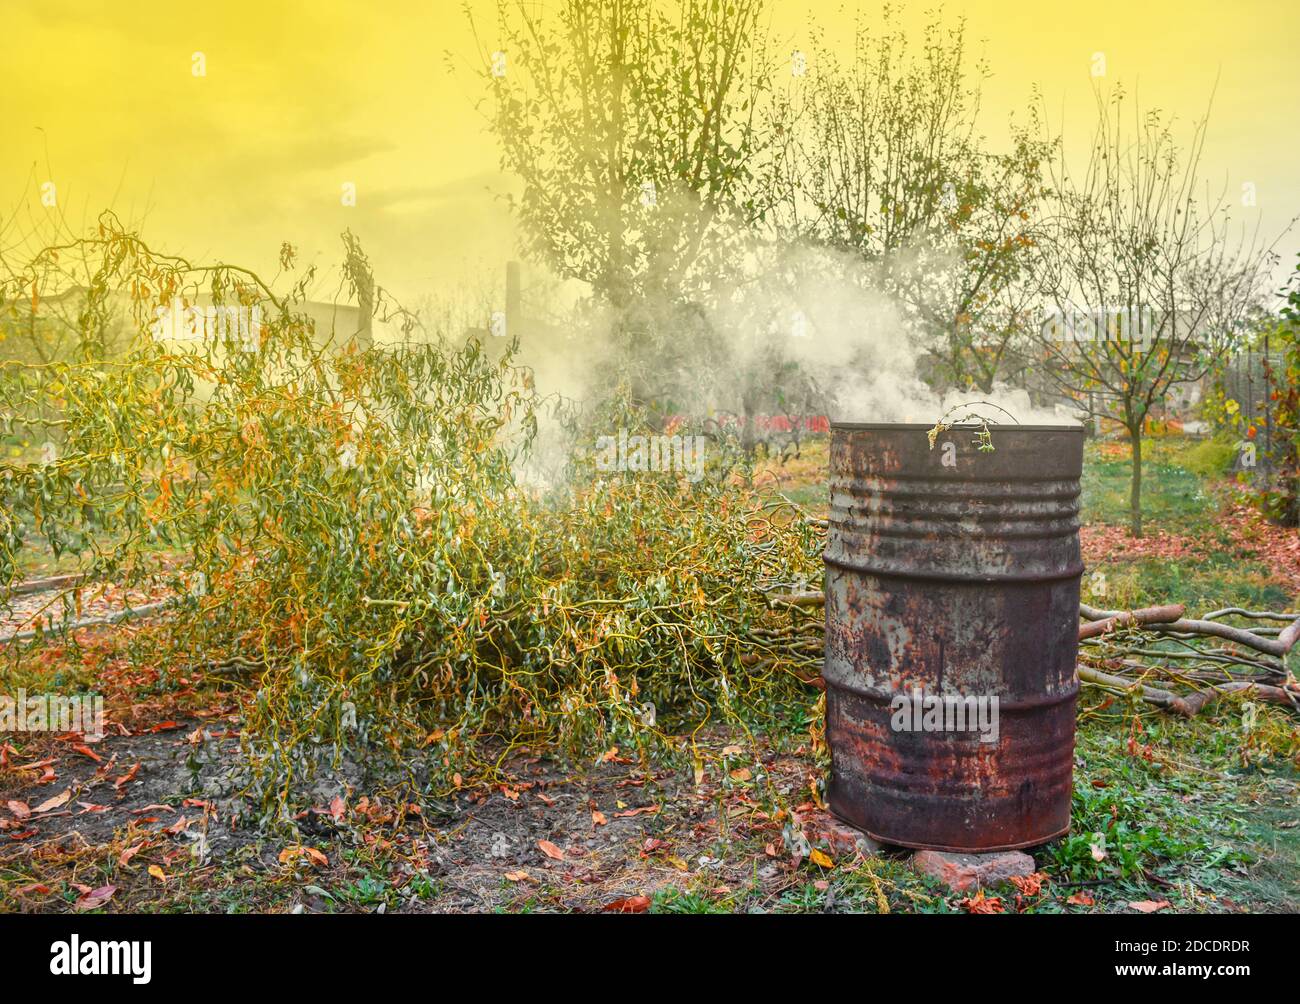 Autumn activity in garden, burning leaves, branches and dry grass in a old rusty barrel. Air pollution from farmers in the countryside Stock Photo